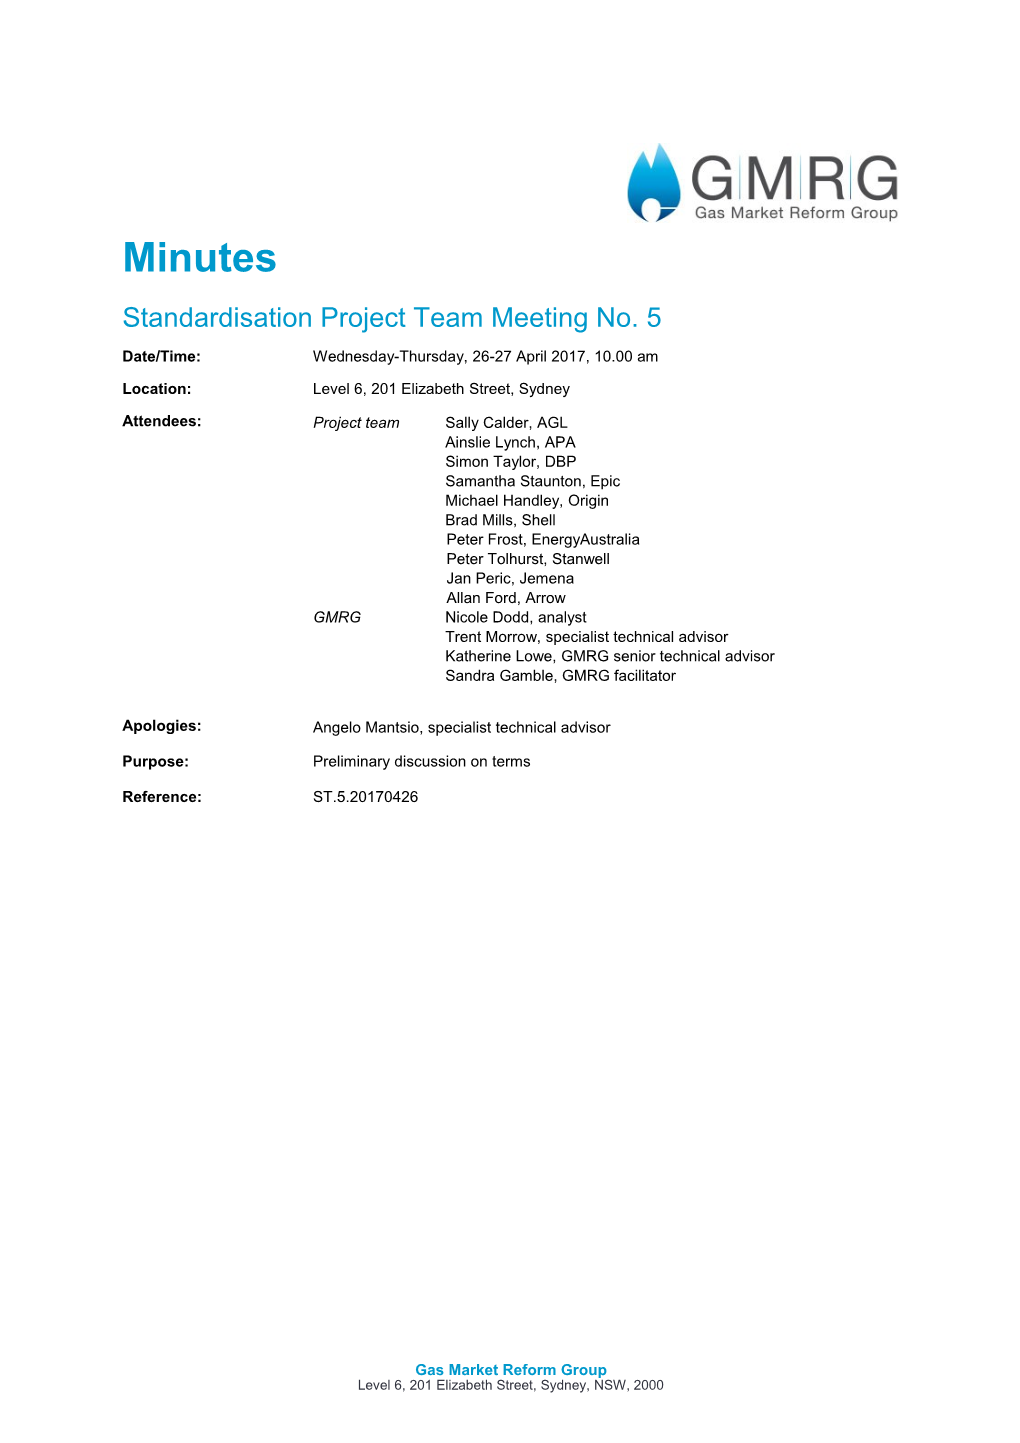 Standardisation Project Team: Meeting No. 5 - Minutes